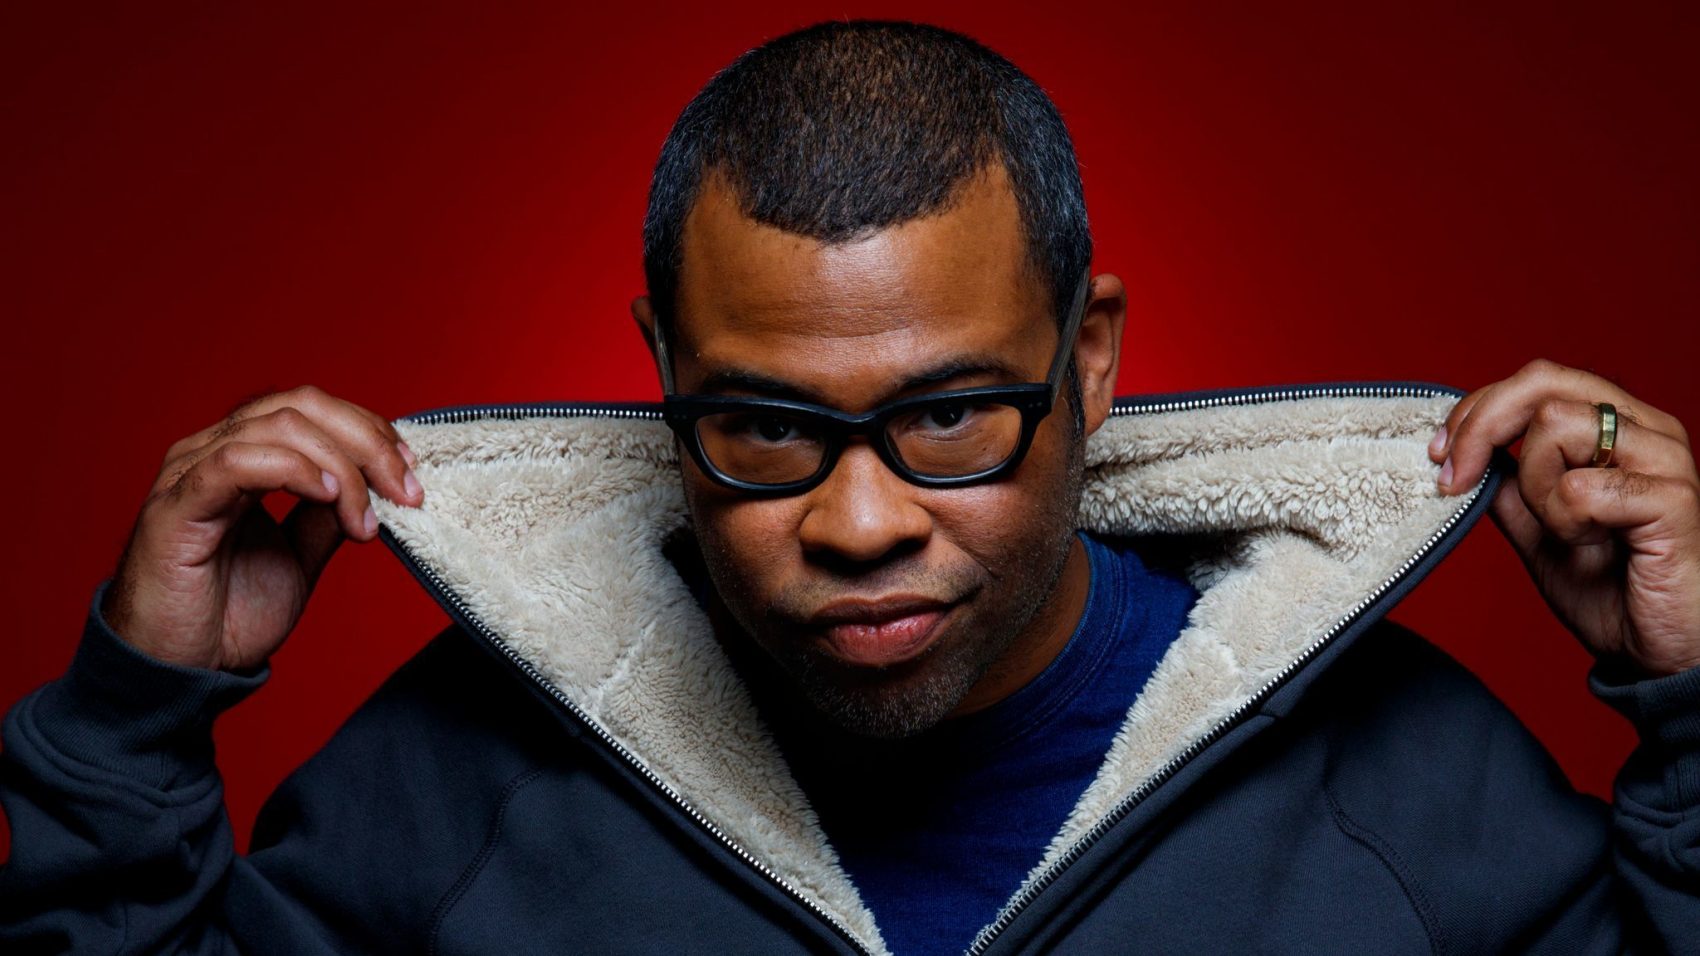 Jordan peele is back for another thriller and we say bring it